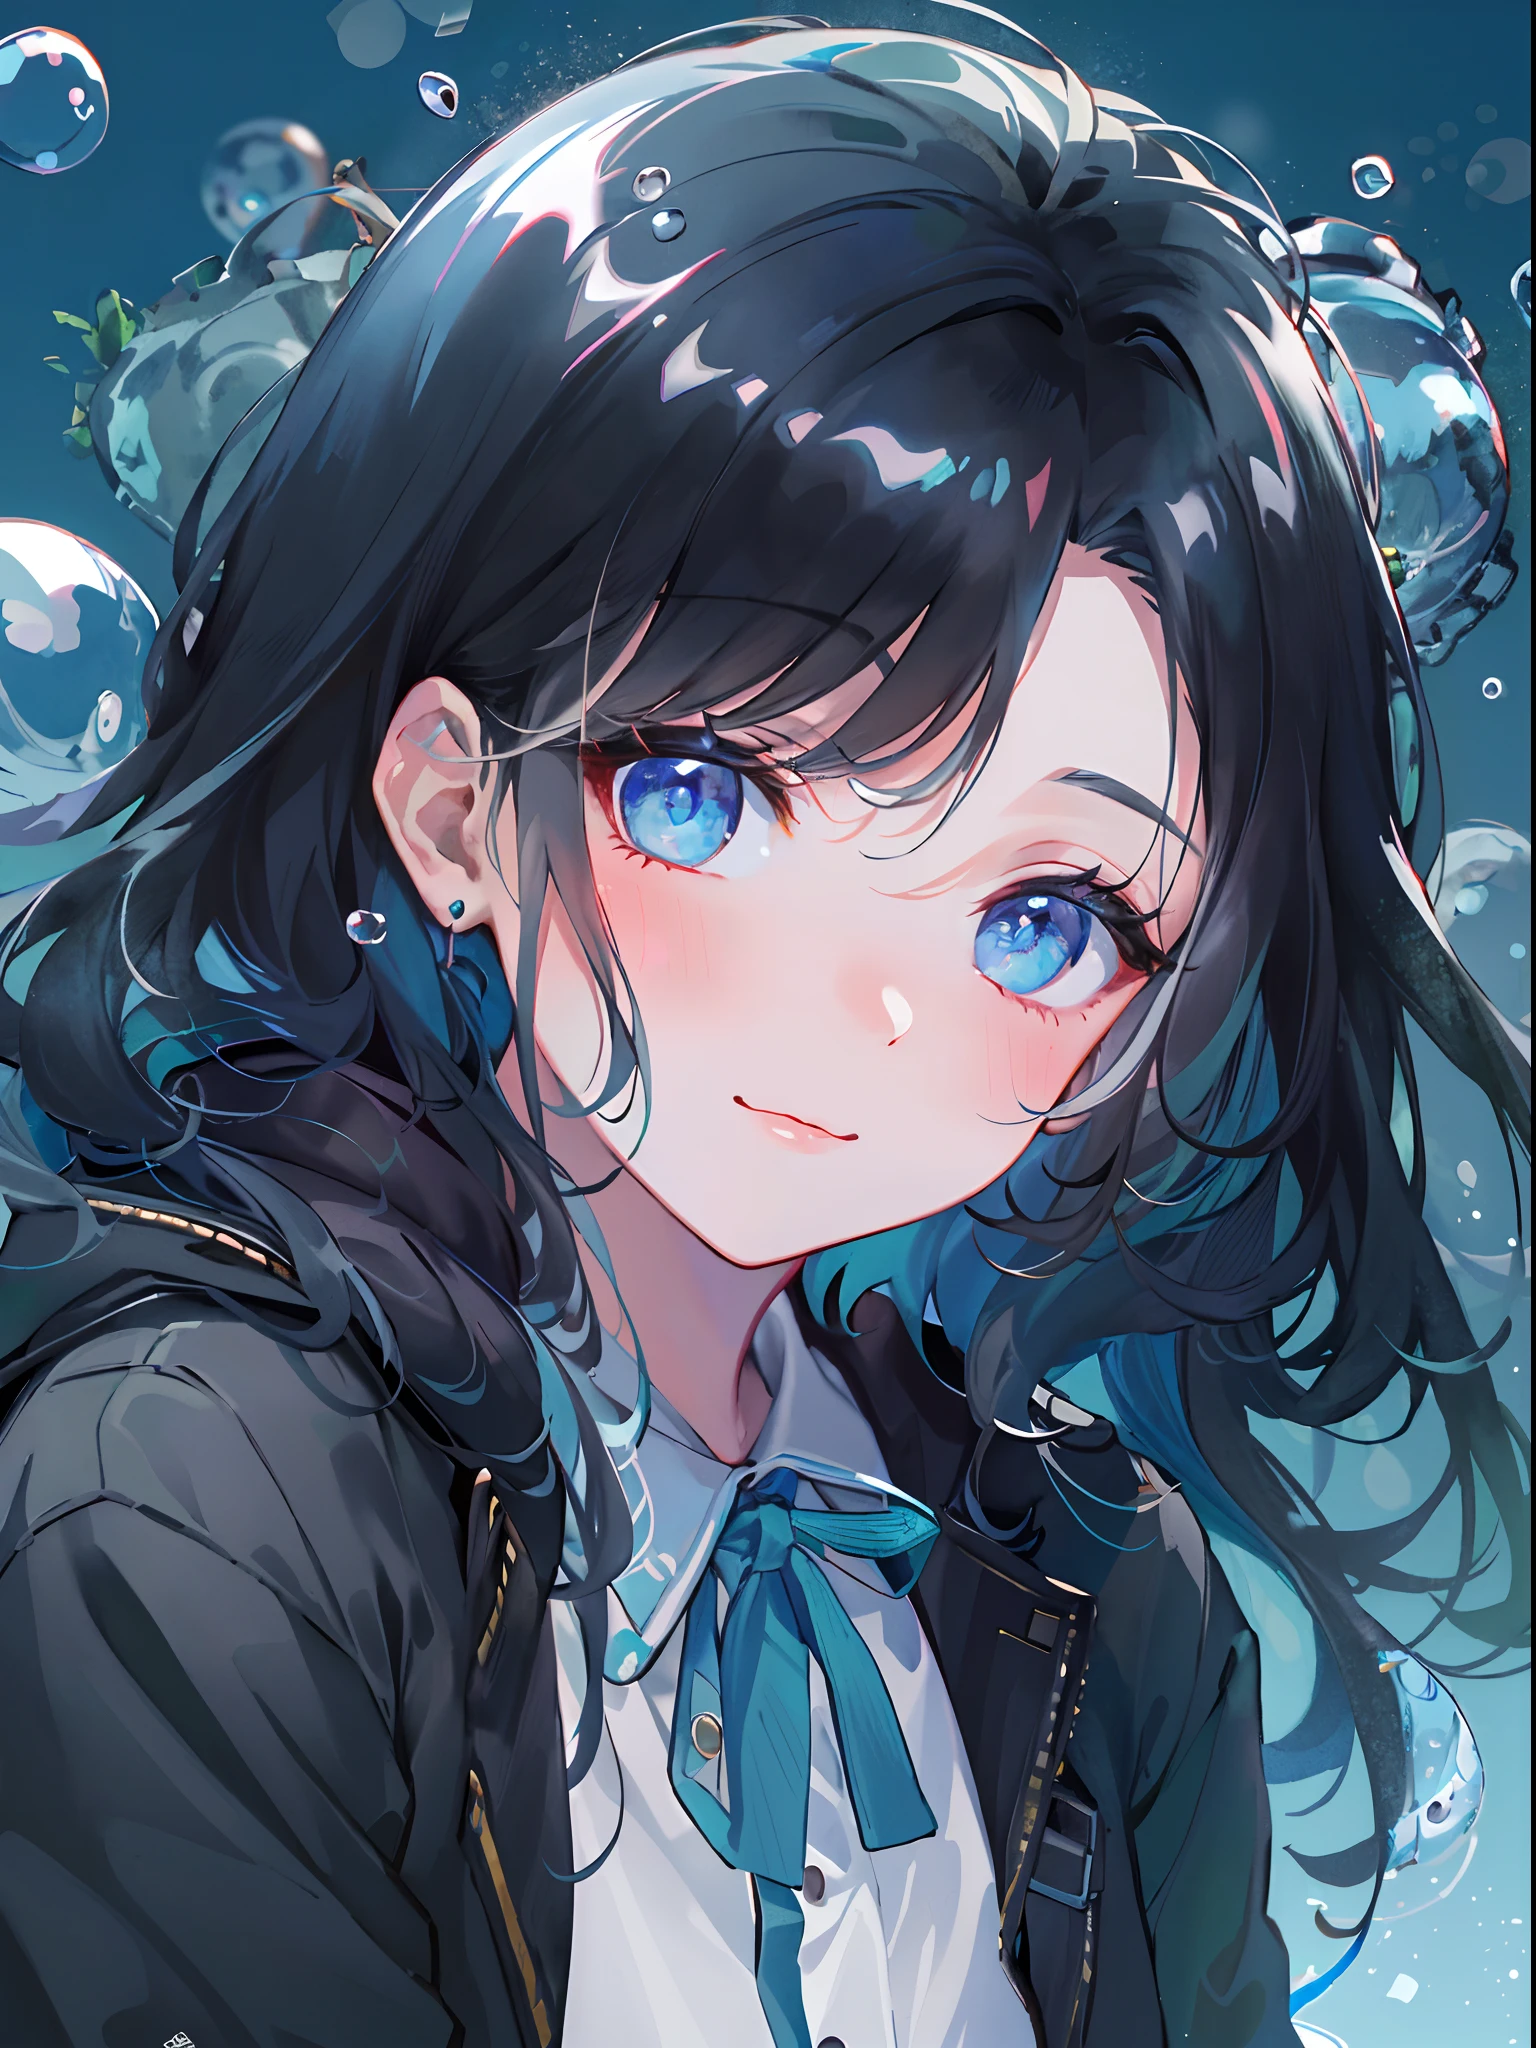 ((top-quality)), ((​masterpiece)), ((Ultra-detail)), (extremely delicate and beautiful), girl with, solo, cold attitude,((Black jacket)),She is very(relax)with  the(Settled down)Looks,A darK-haired, depth of fields,evil smile,Bubble, under the water, Air bubble,bright light blue eyes,Inner color with black hair and light blue tips,Cold background,Bob Hair - Linear Art, shortpants、knee high socks、White uniform like 、Light blue ribbon ties、Clothes are sheer、Hands in pockets、Ponytail hair、